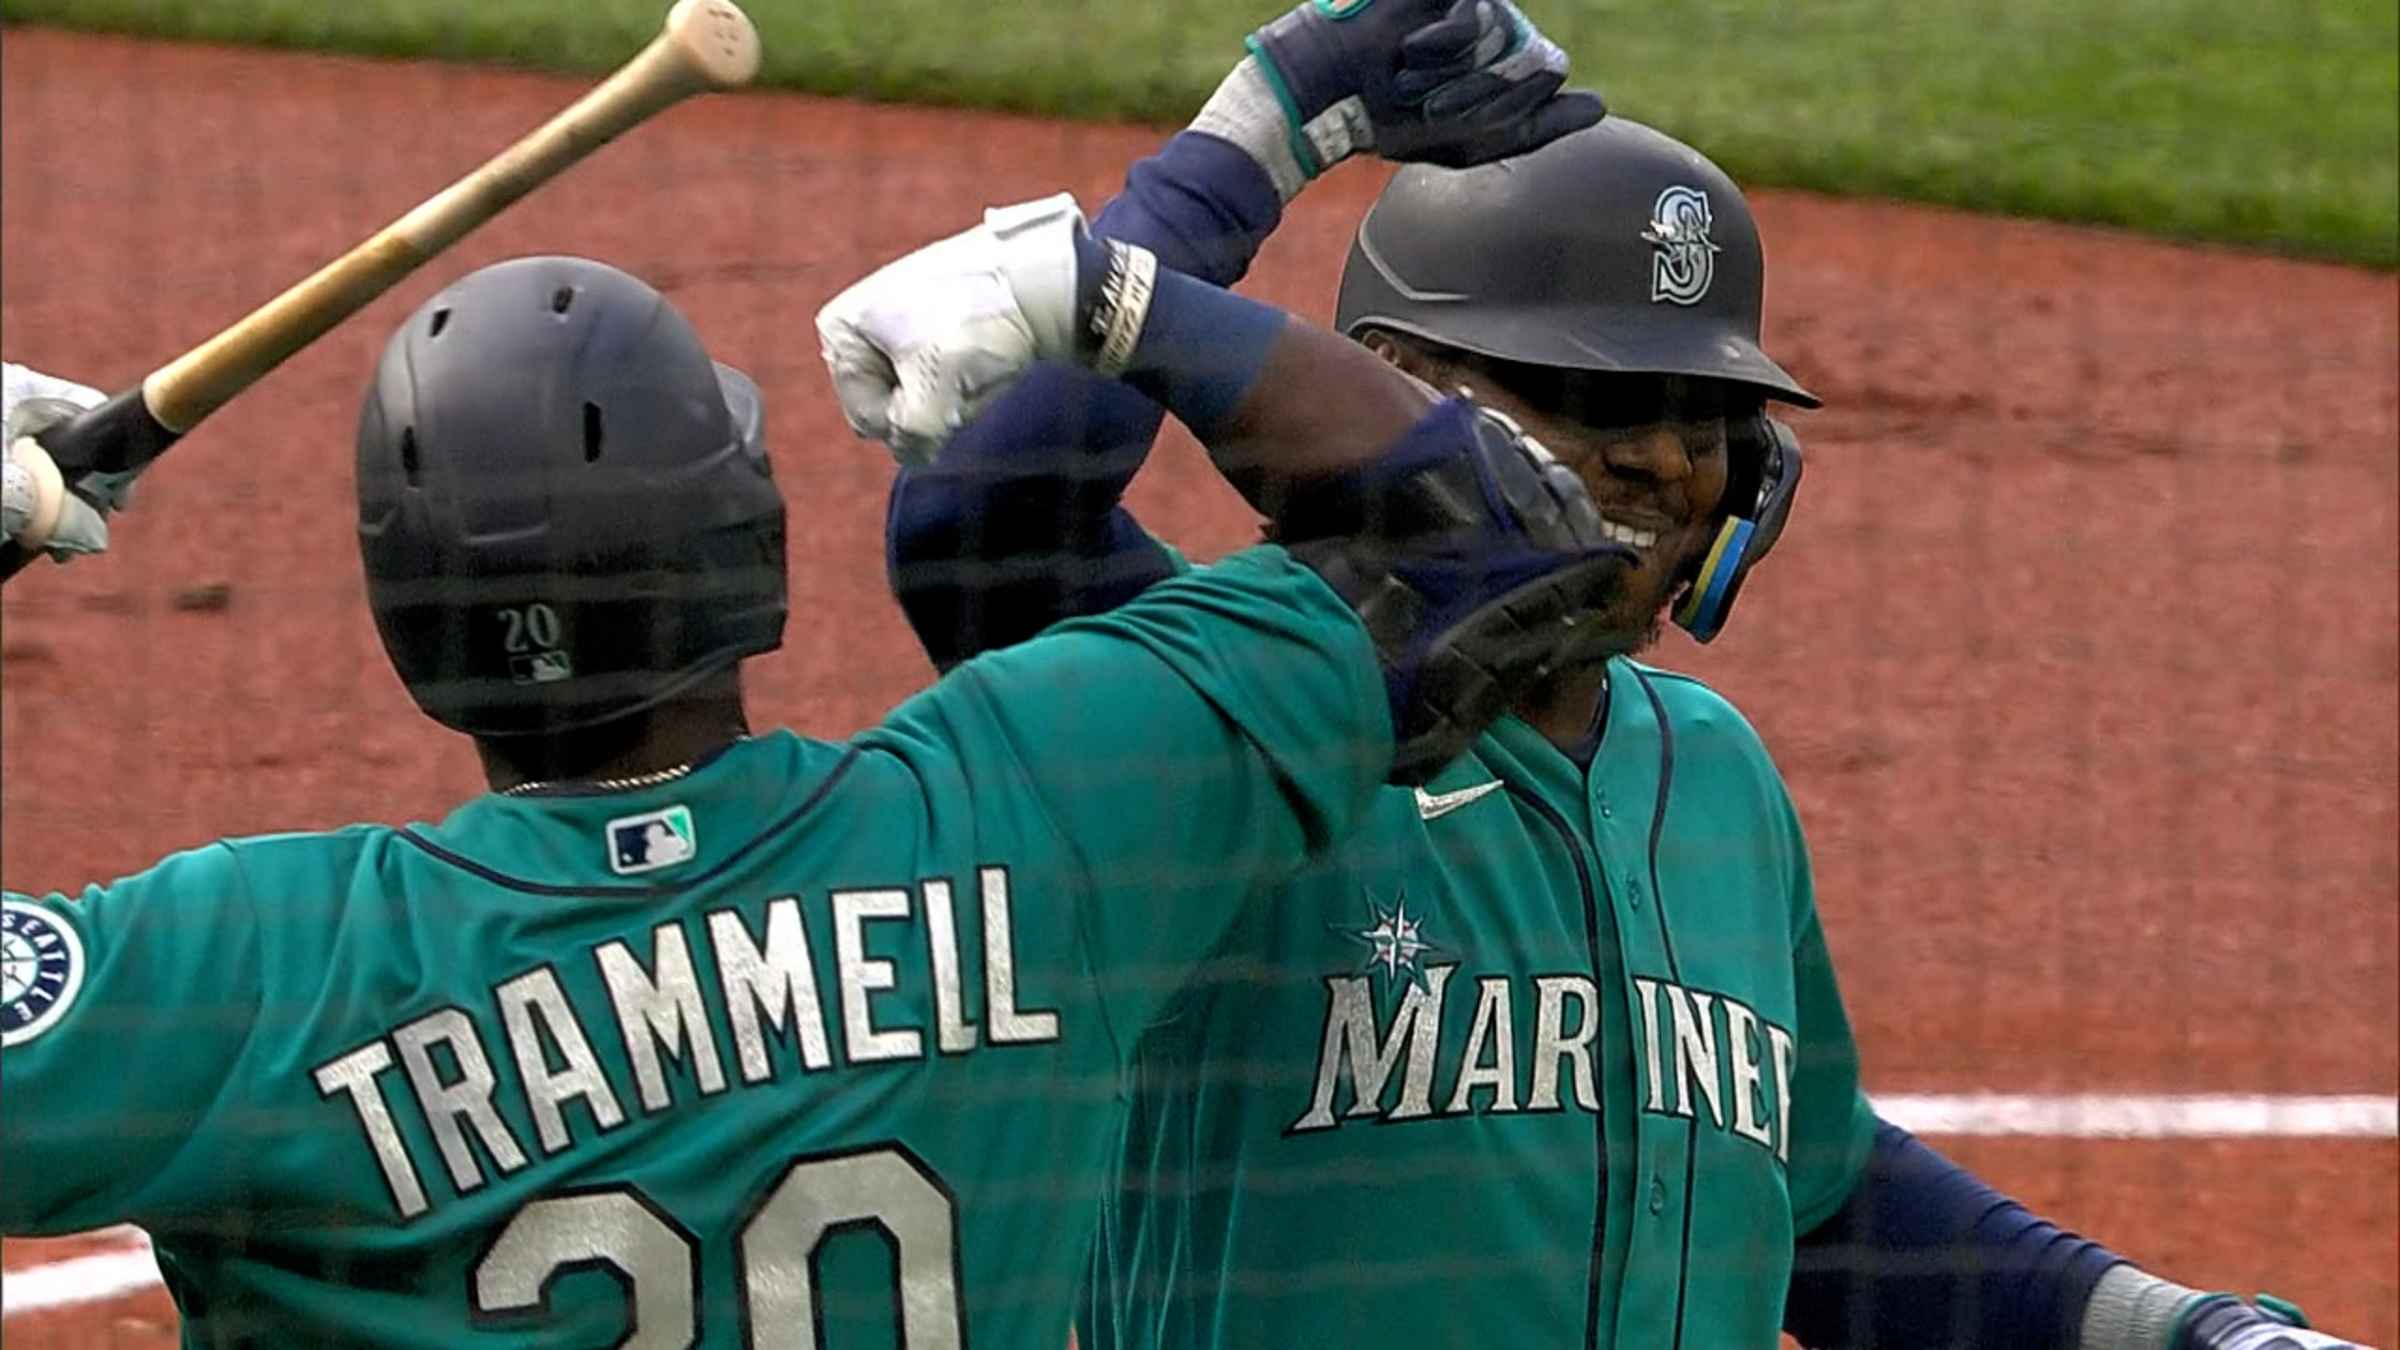 MLB Gameday: Astros 1, Mariners 6 Final Score (05/27/2022)